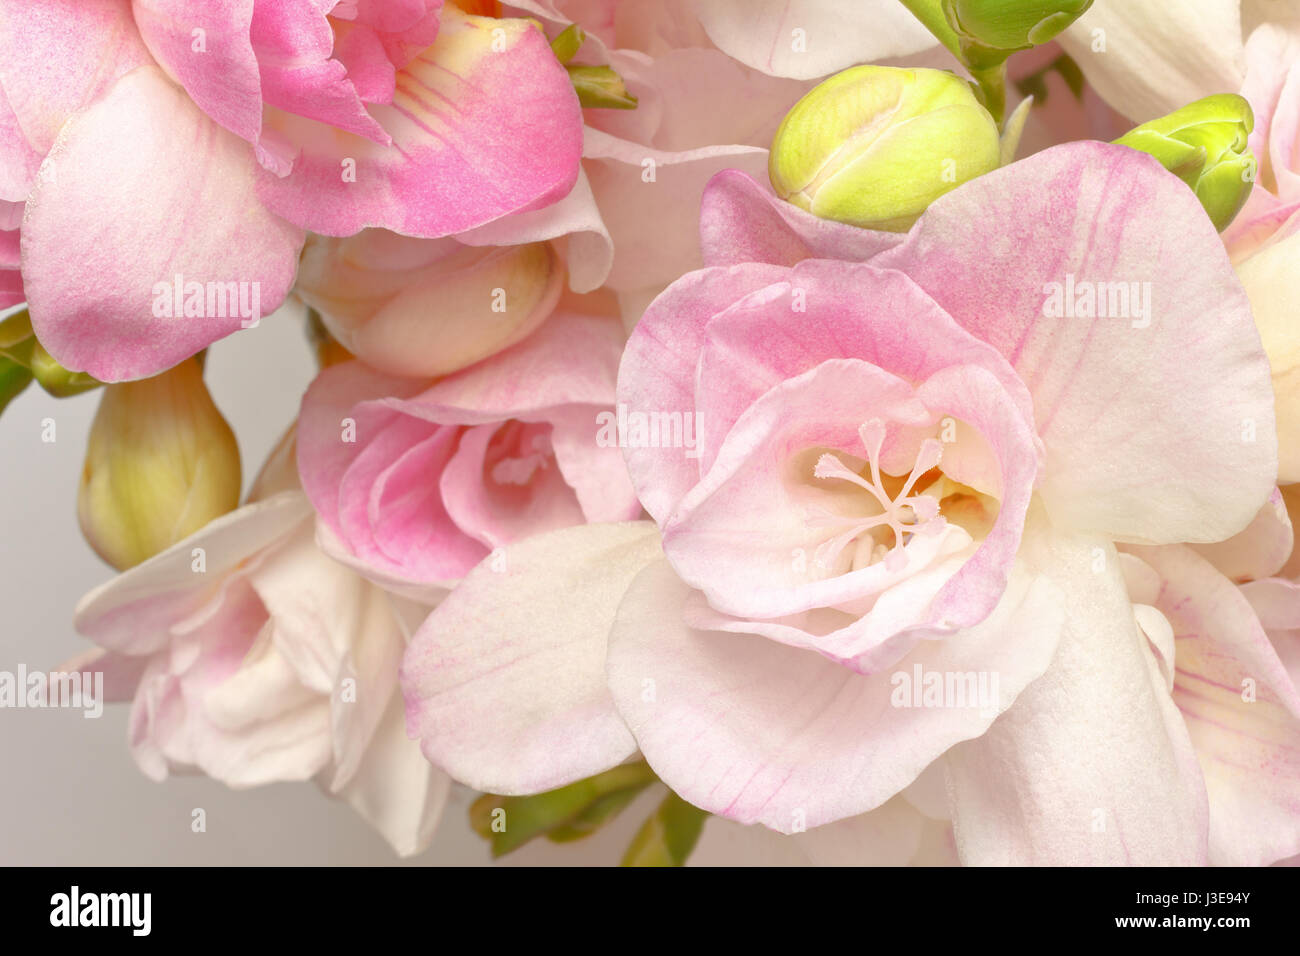 Close-up of white and pink freesia flowers and green buds, nostalgic and romantic setting in soft light, background Stock Photo